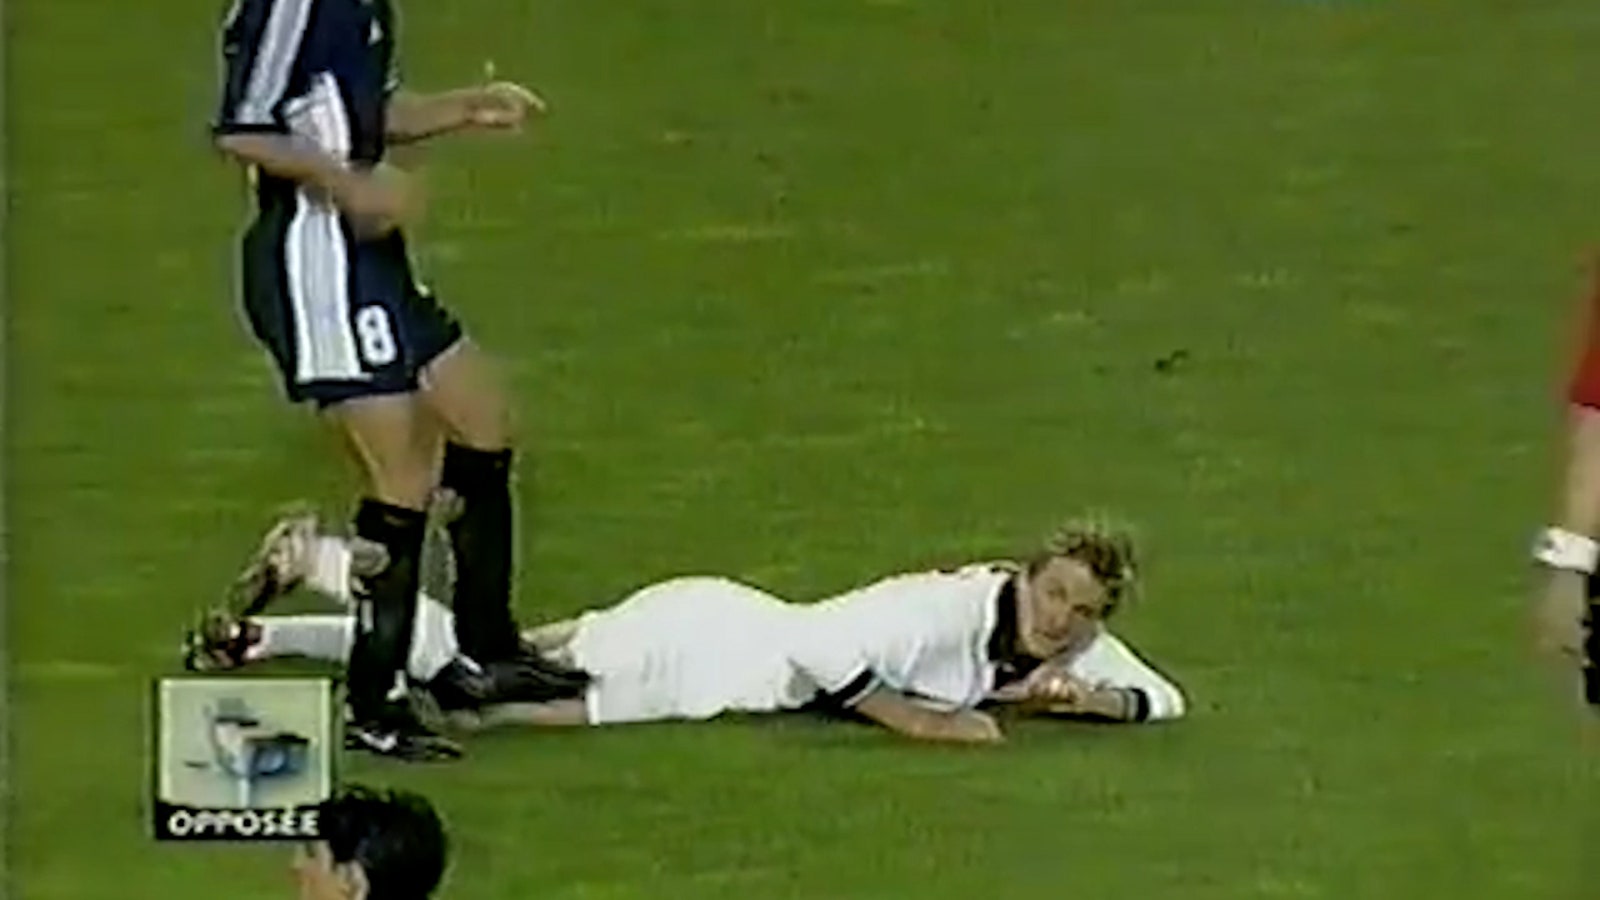 David Beckham sent off for England in 1998 World Cup